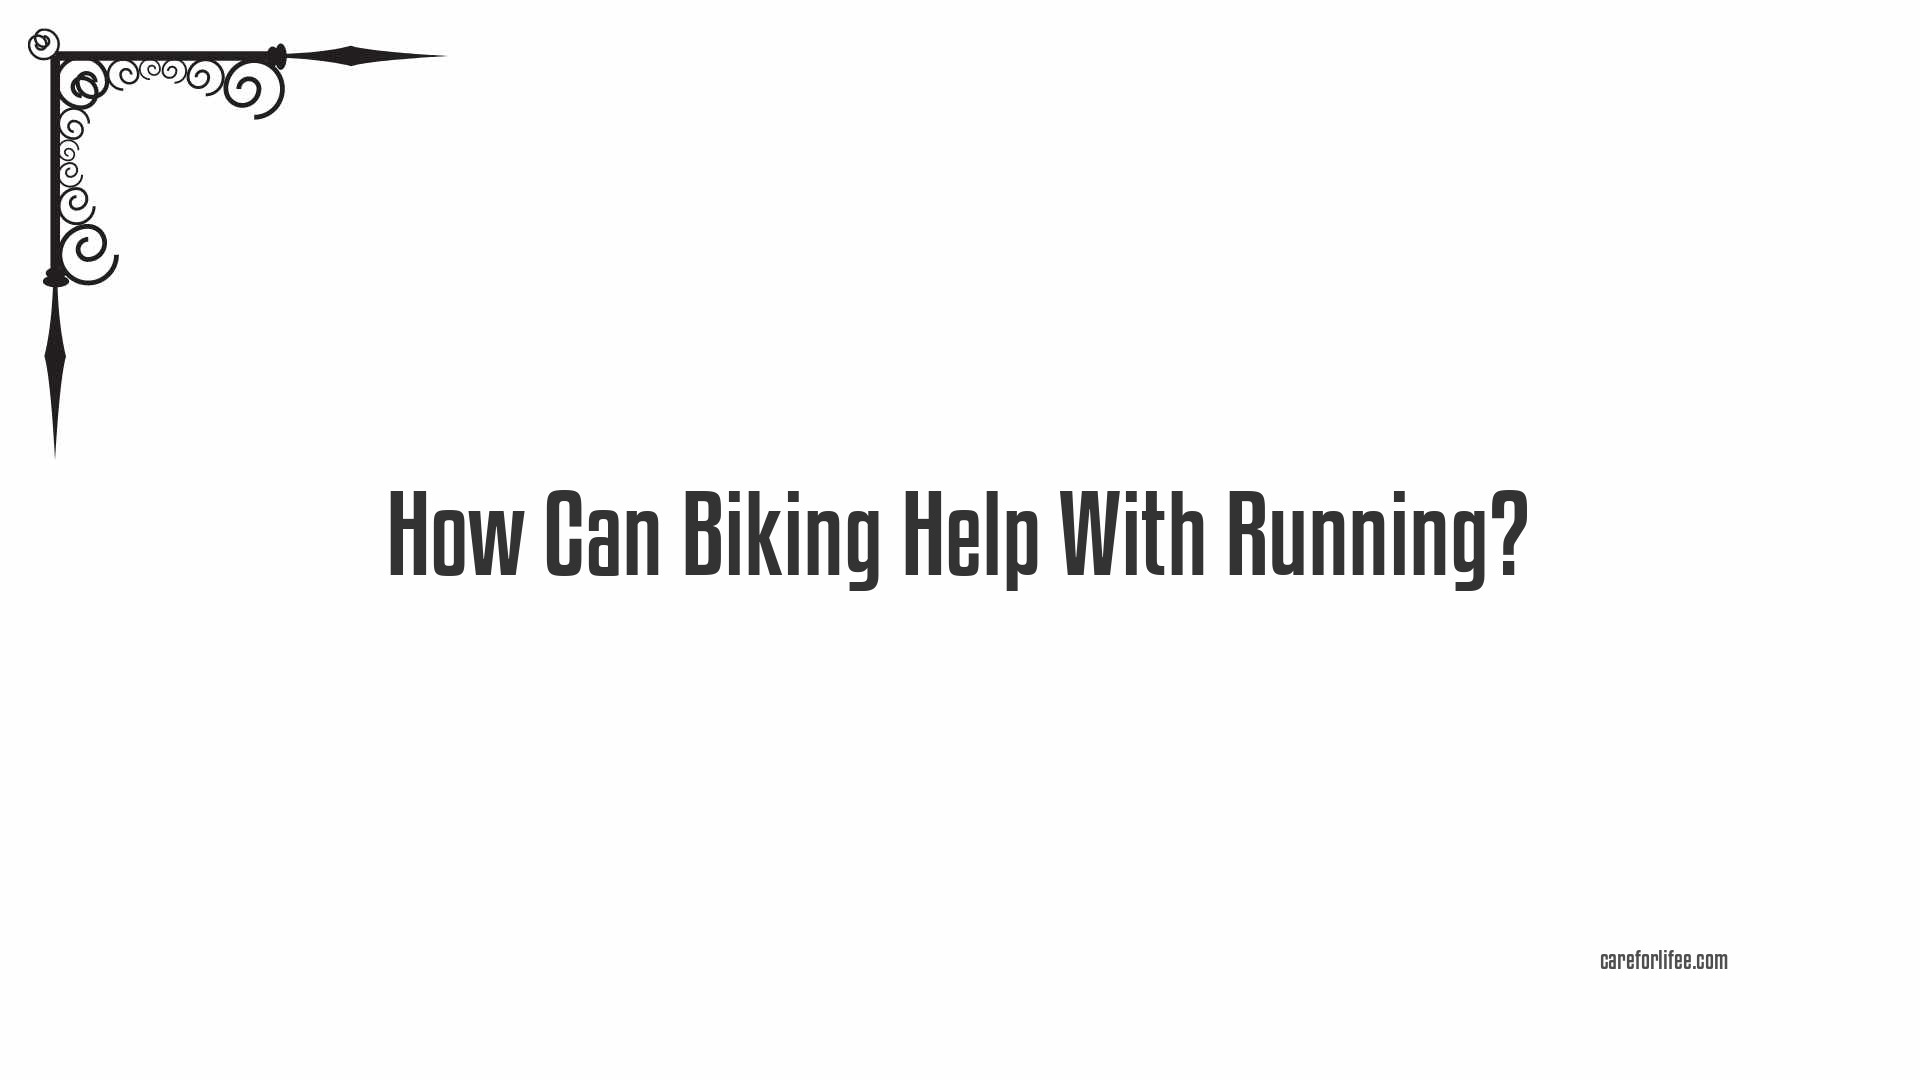 How Can Biking Help With Running?